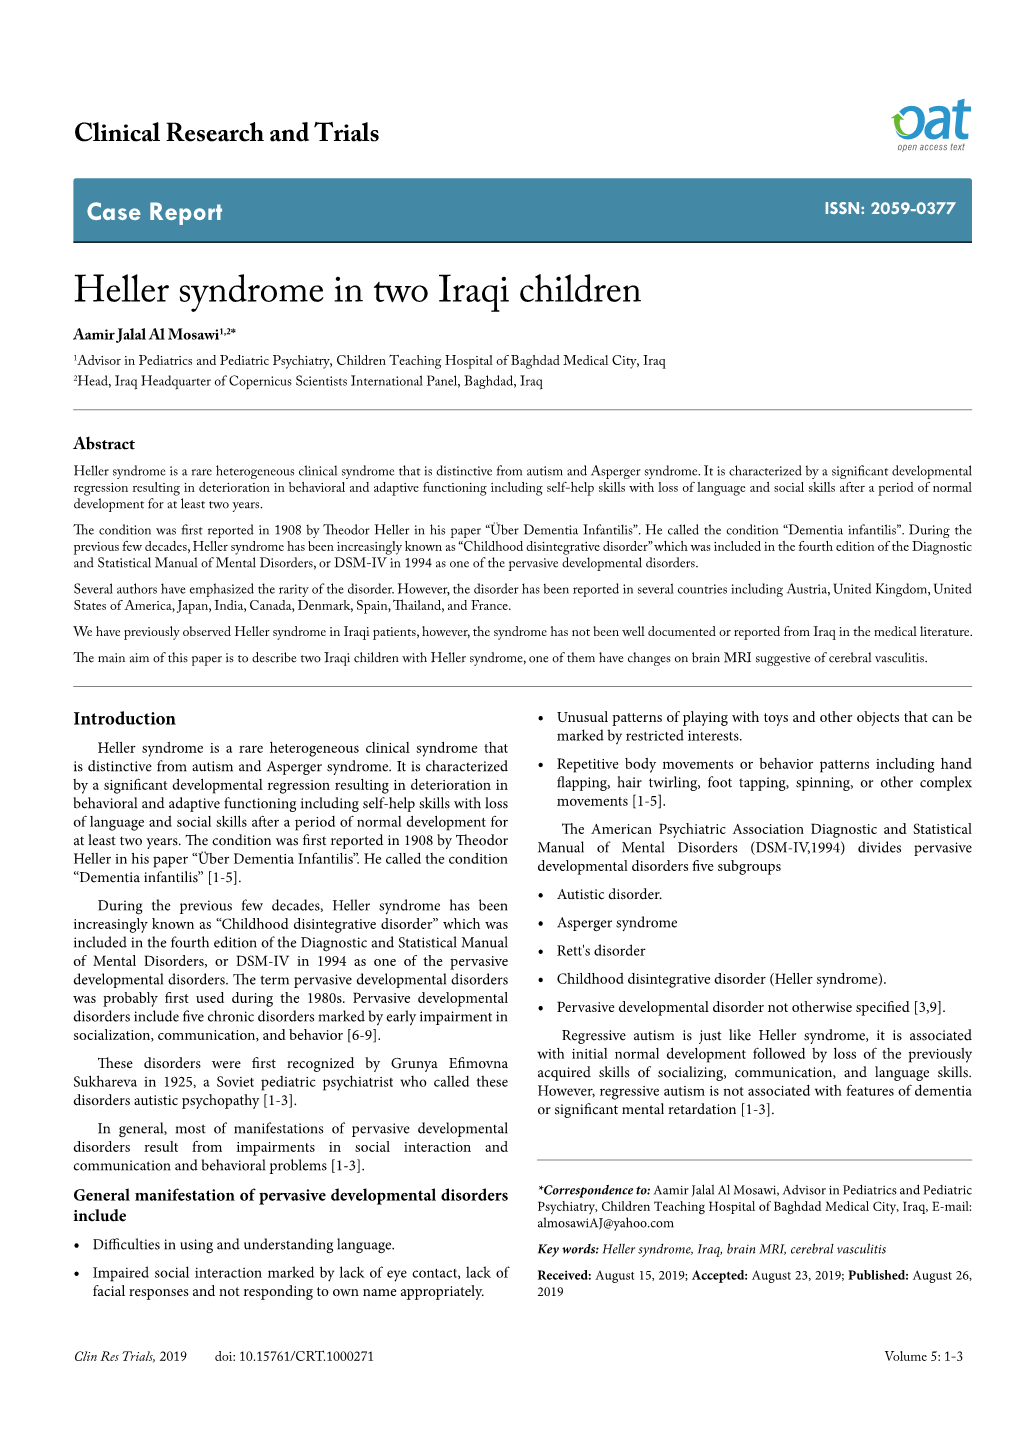 Heller Syndrome in Two Iraqi Children